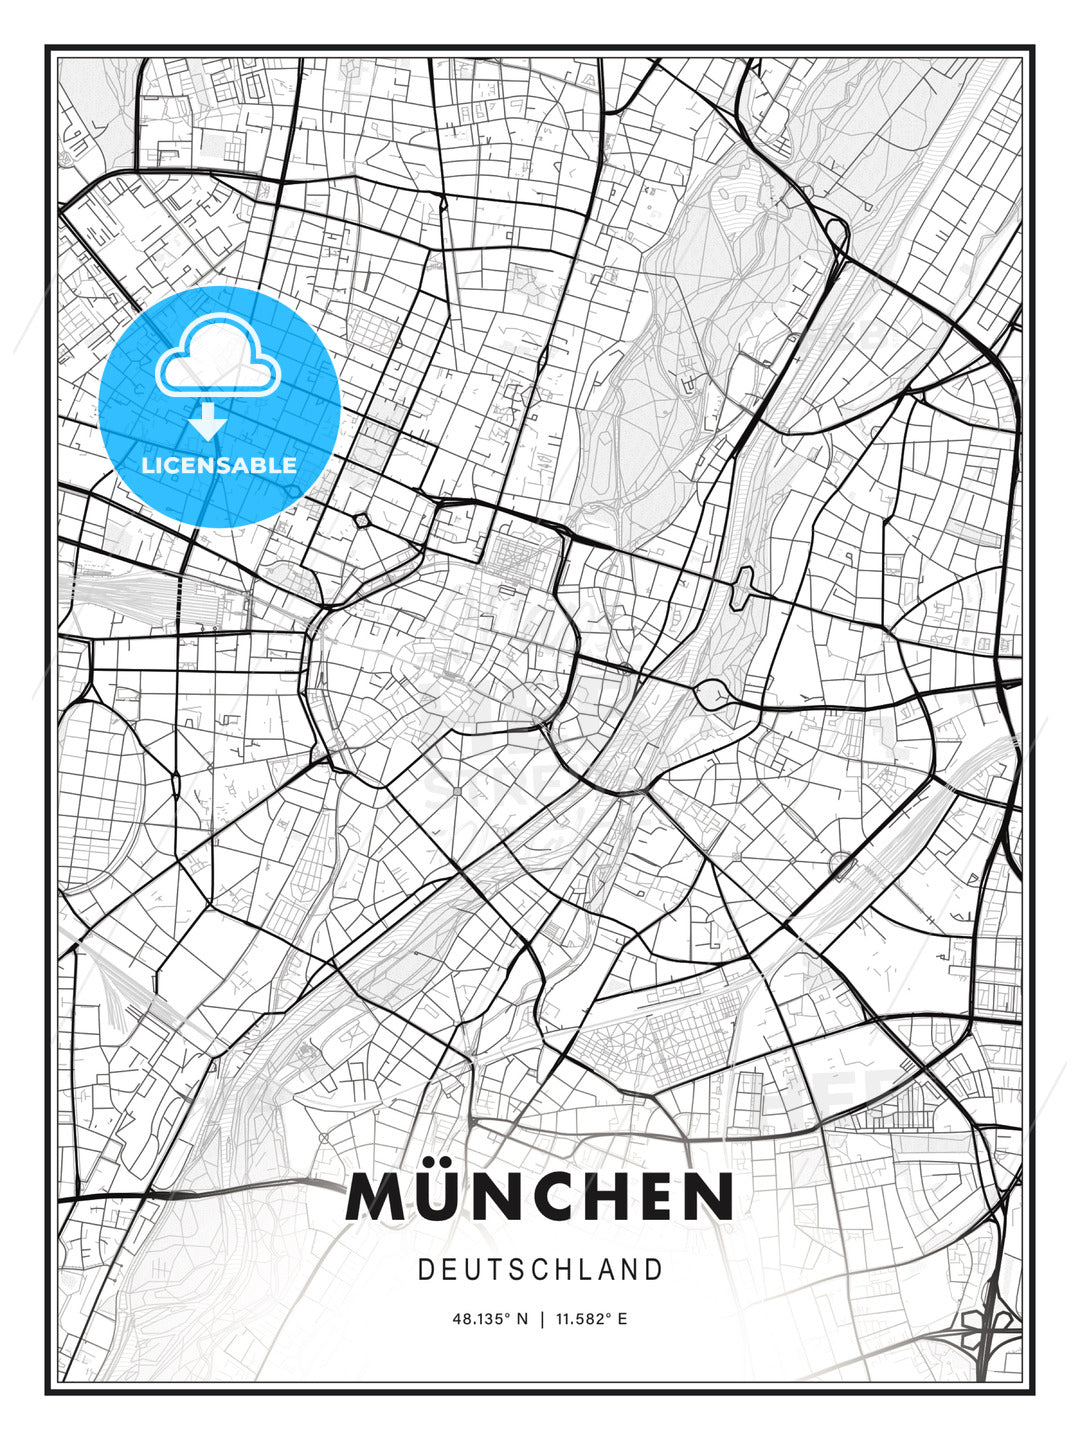 München, Germany, Modern Print Template in Various Formats - HEBSTREITS Sketches